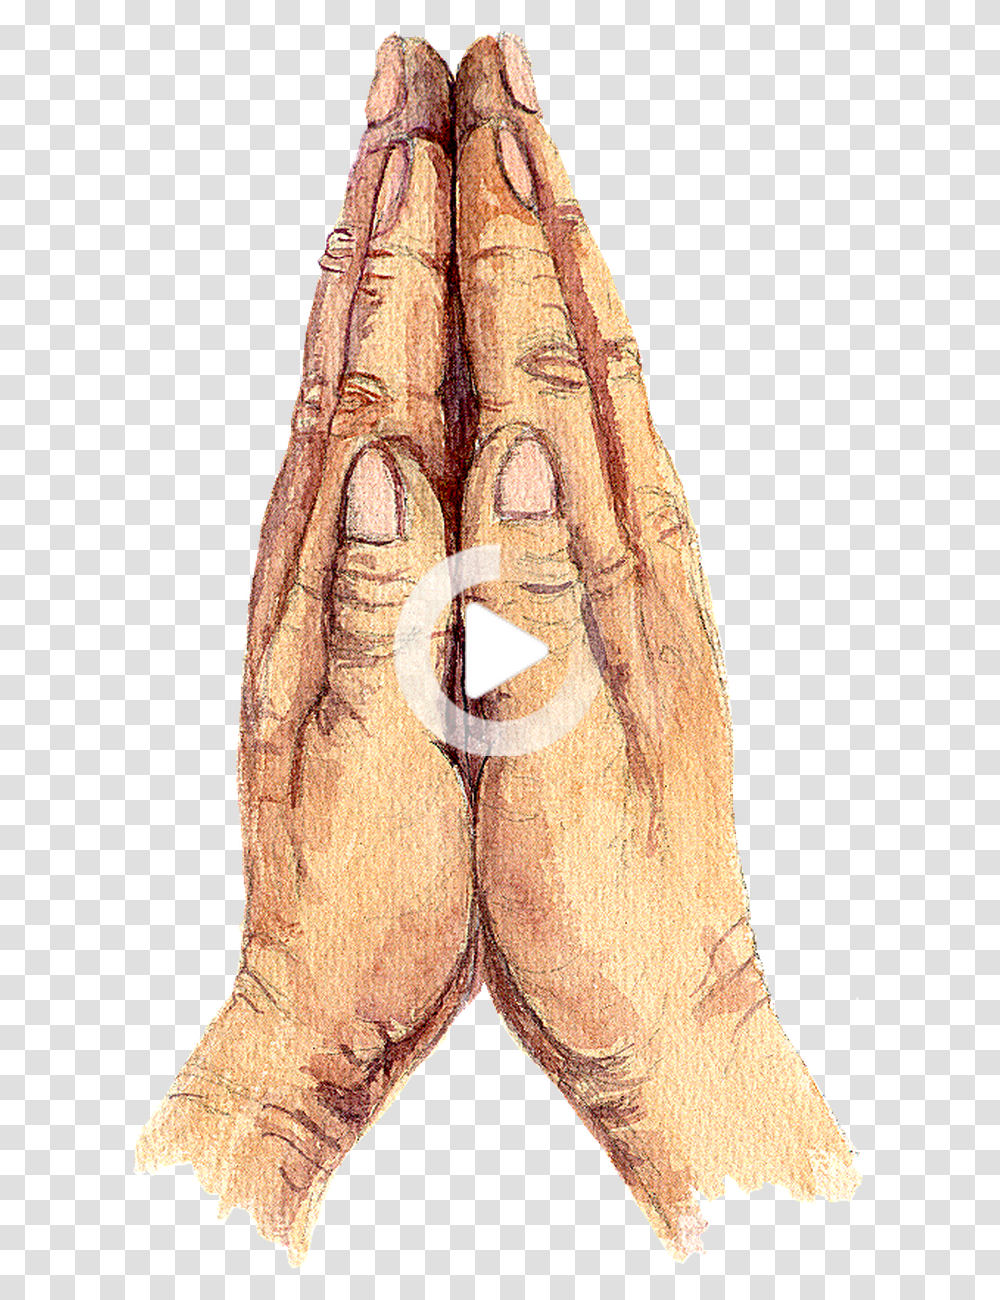 Library Of Praying Hands And Cross Banner Black White Hands In Water Color, Wood, Clothing, Apparel, Figurine Transparent Png